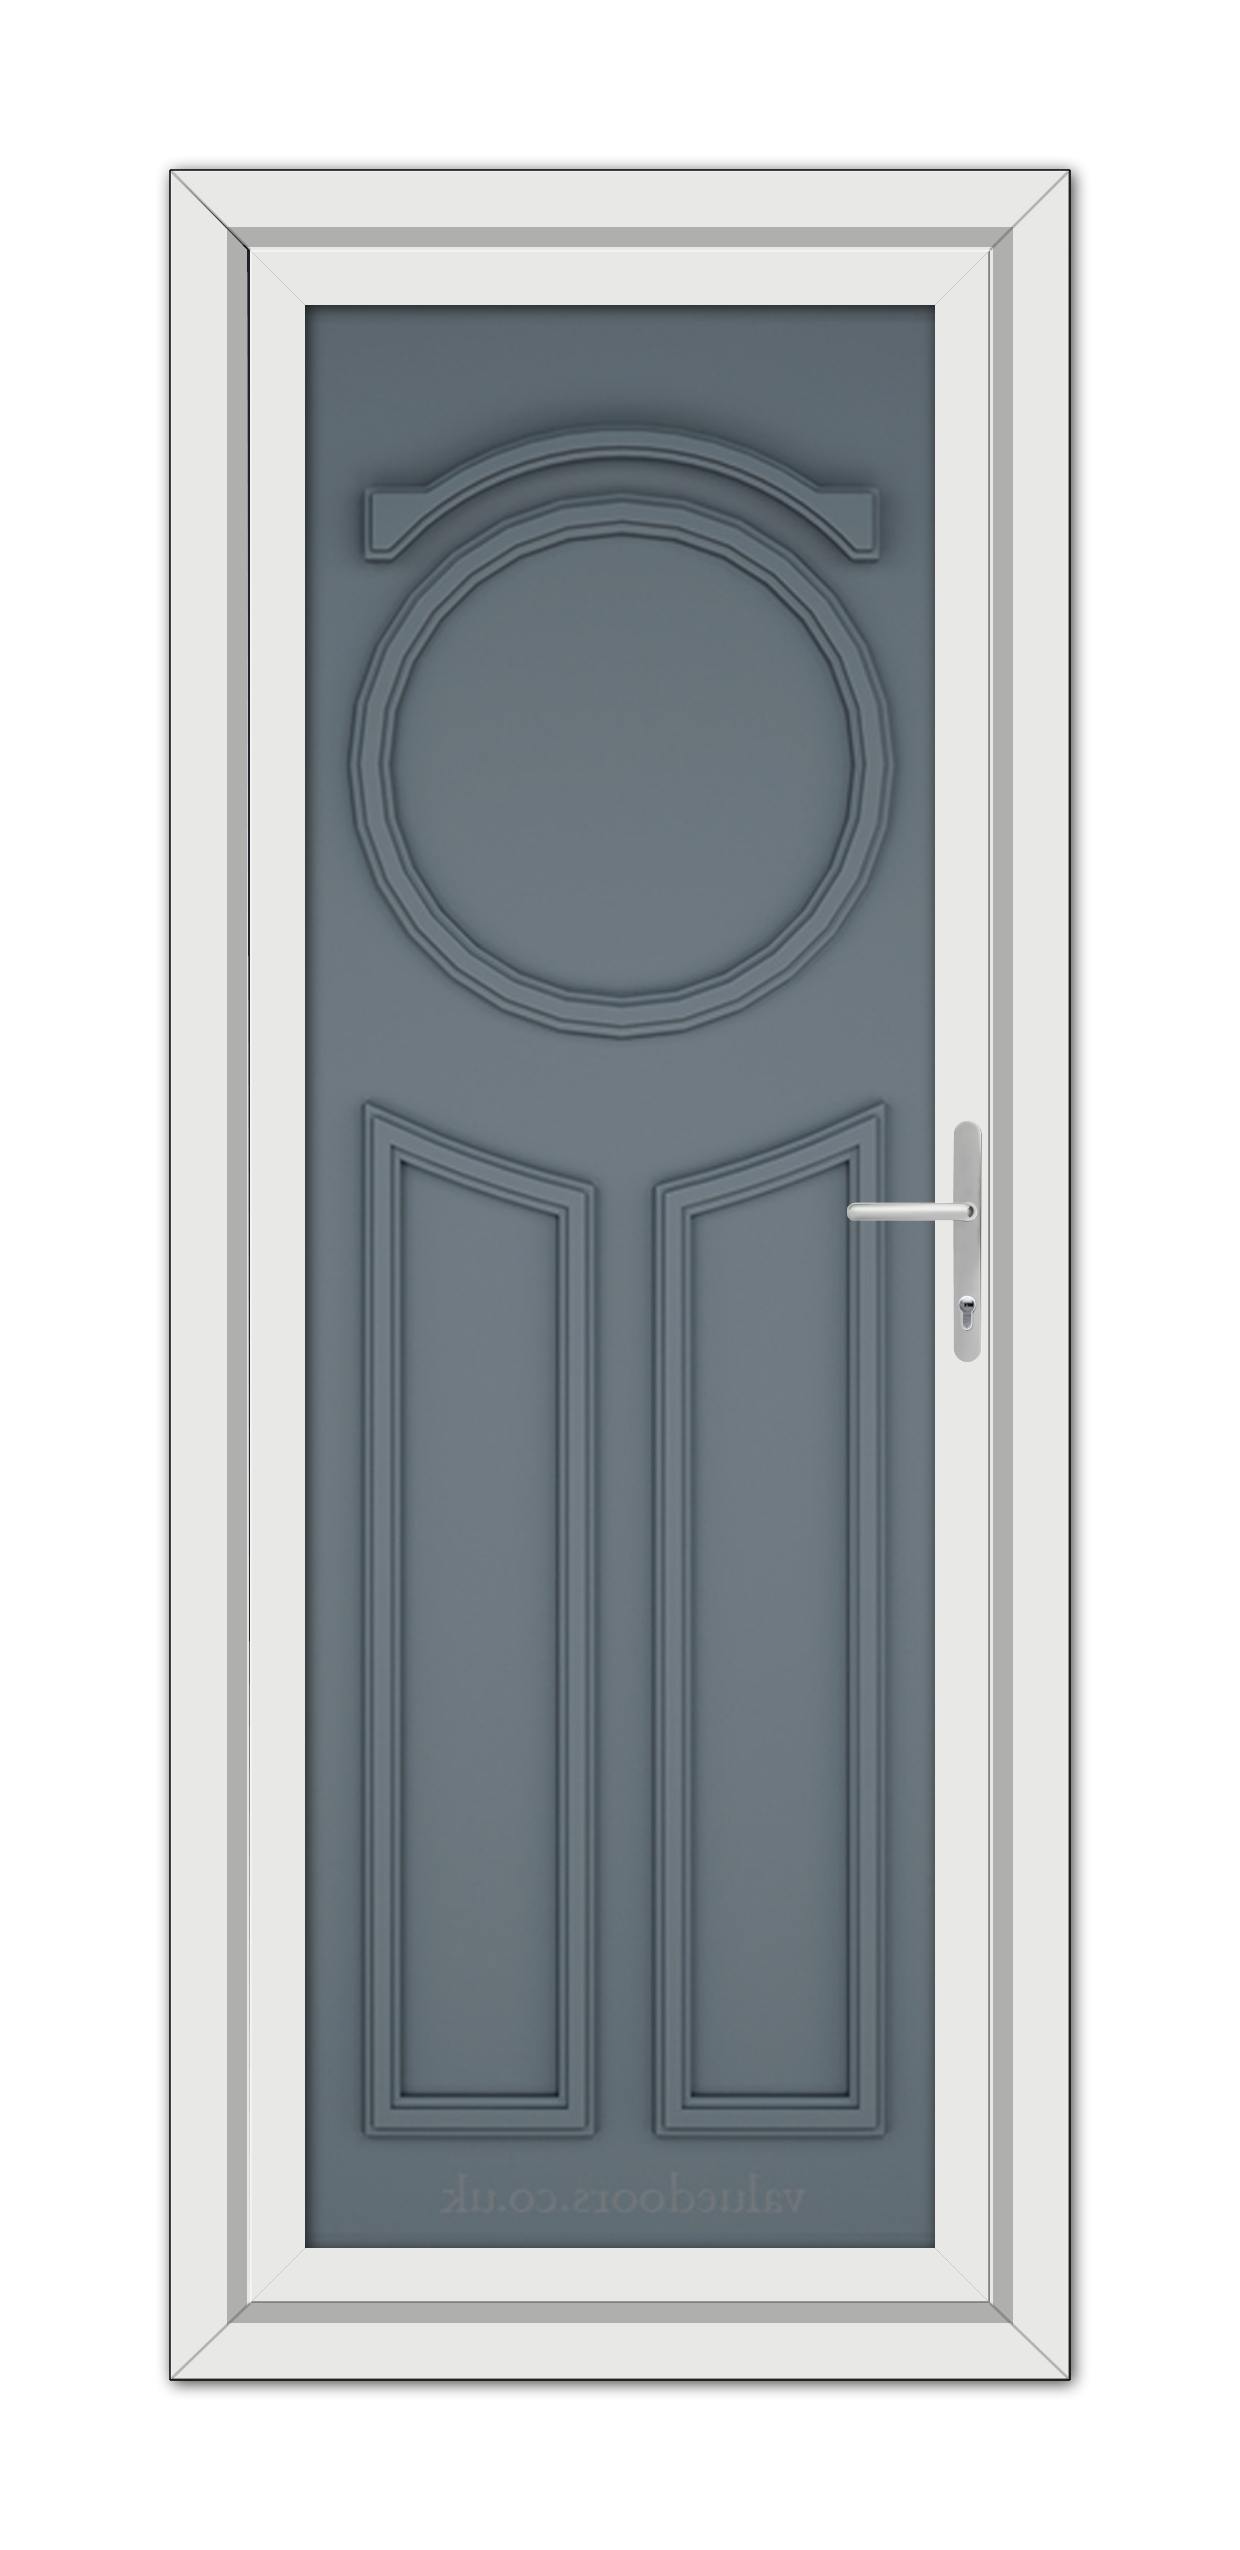 A Slate Grey Blenheim Solid uPVC door with a round design.